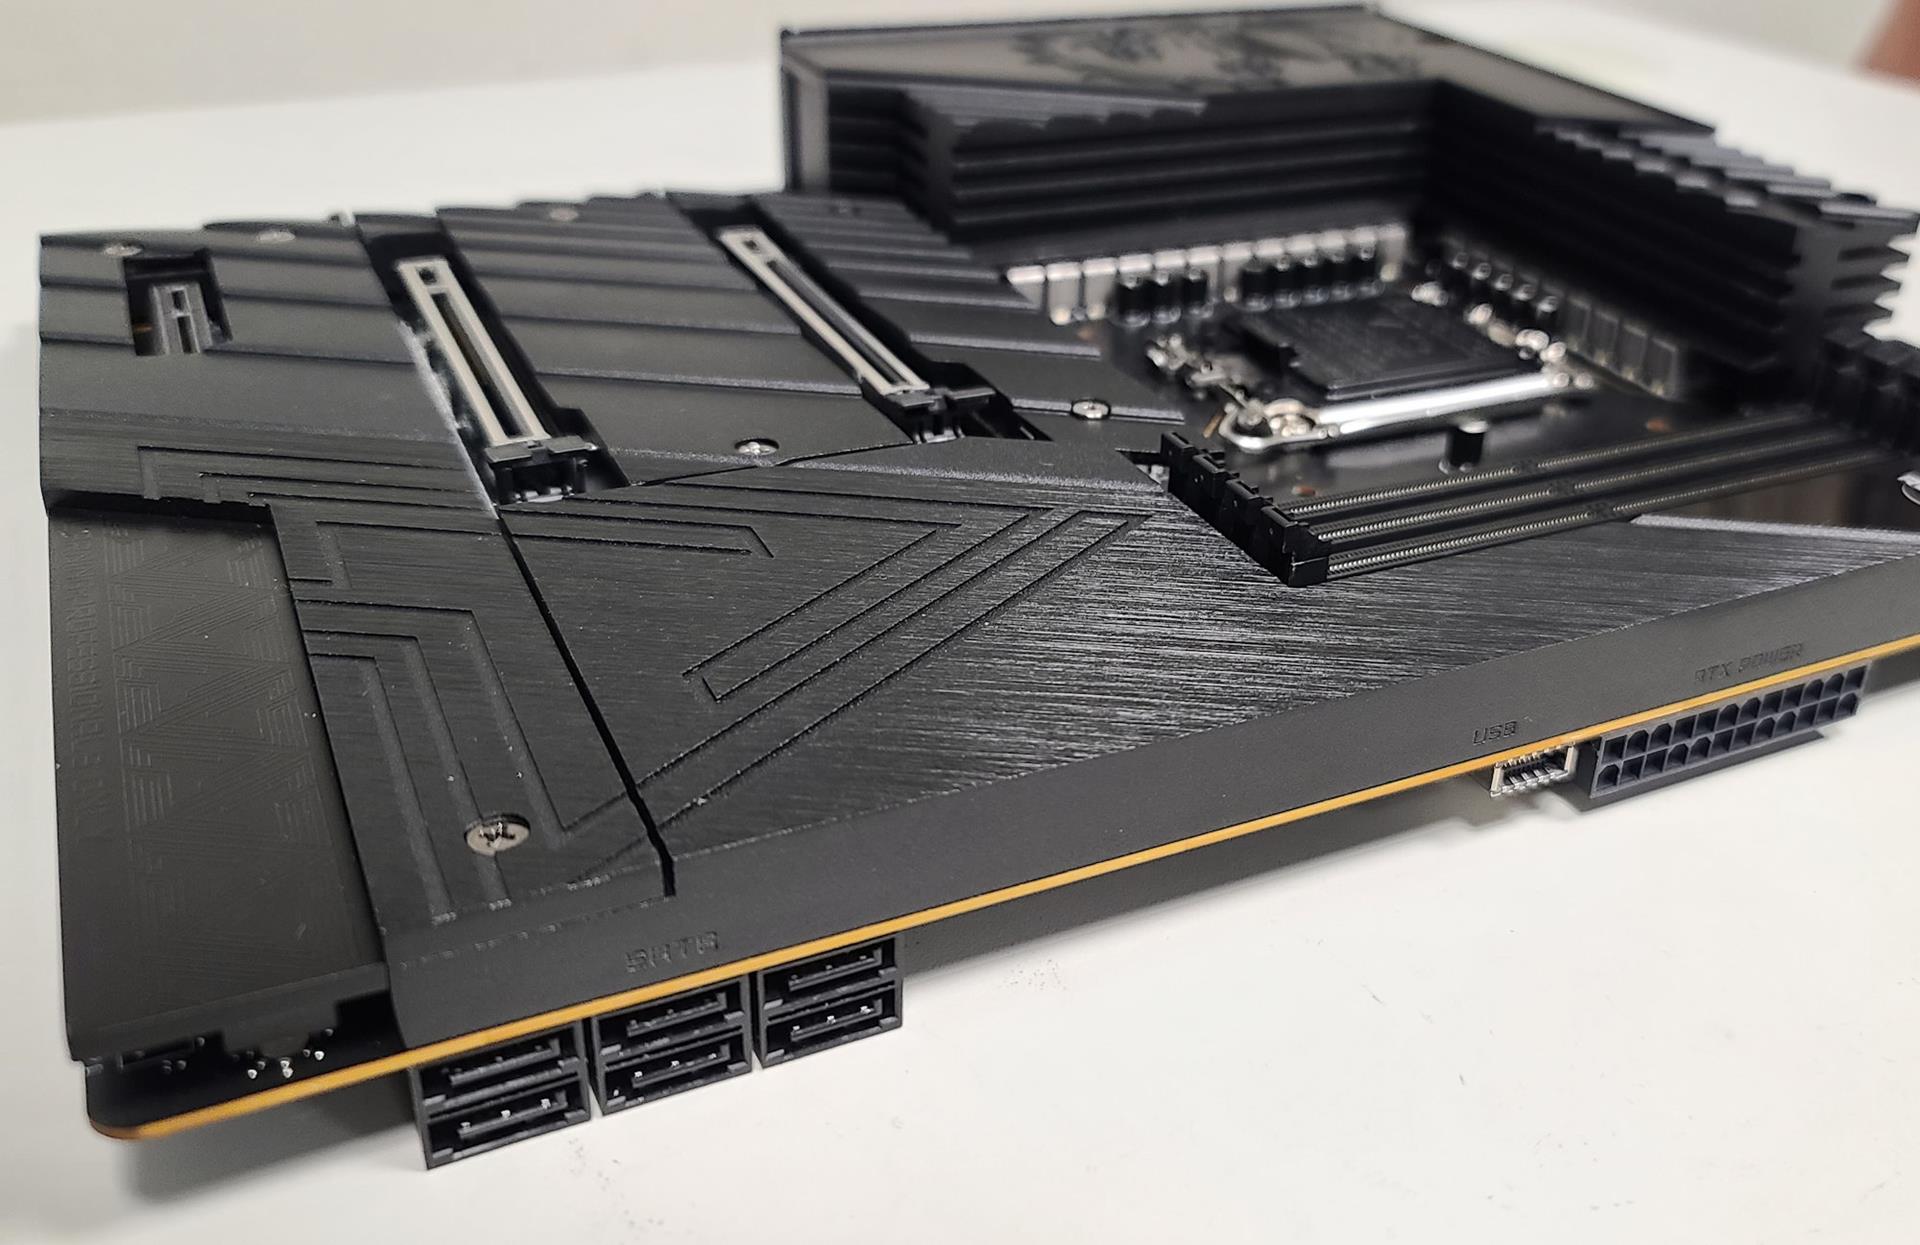 MSI Project Zero like a perfect motherboard?  Certainly not for the applicants